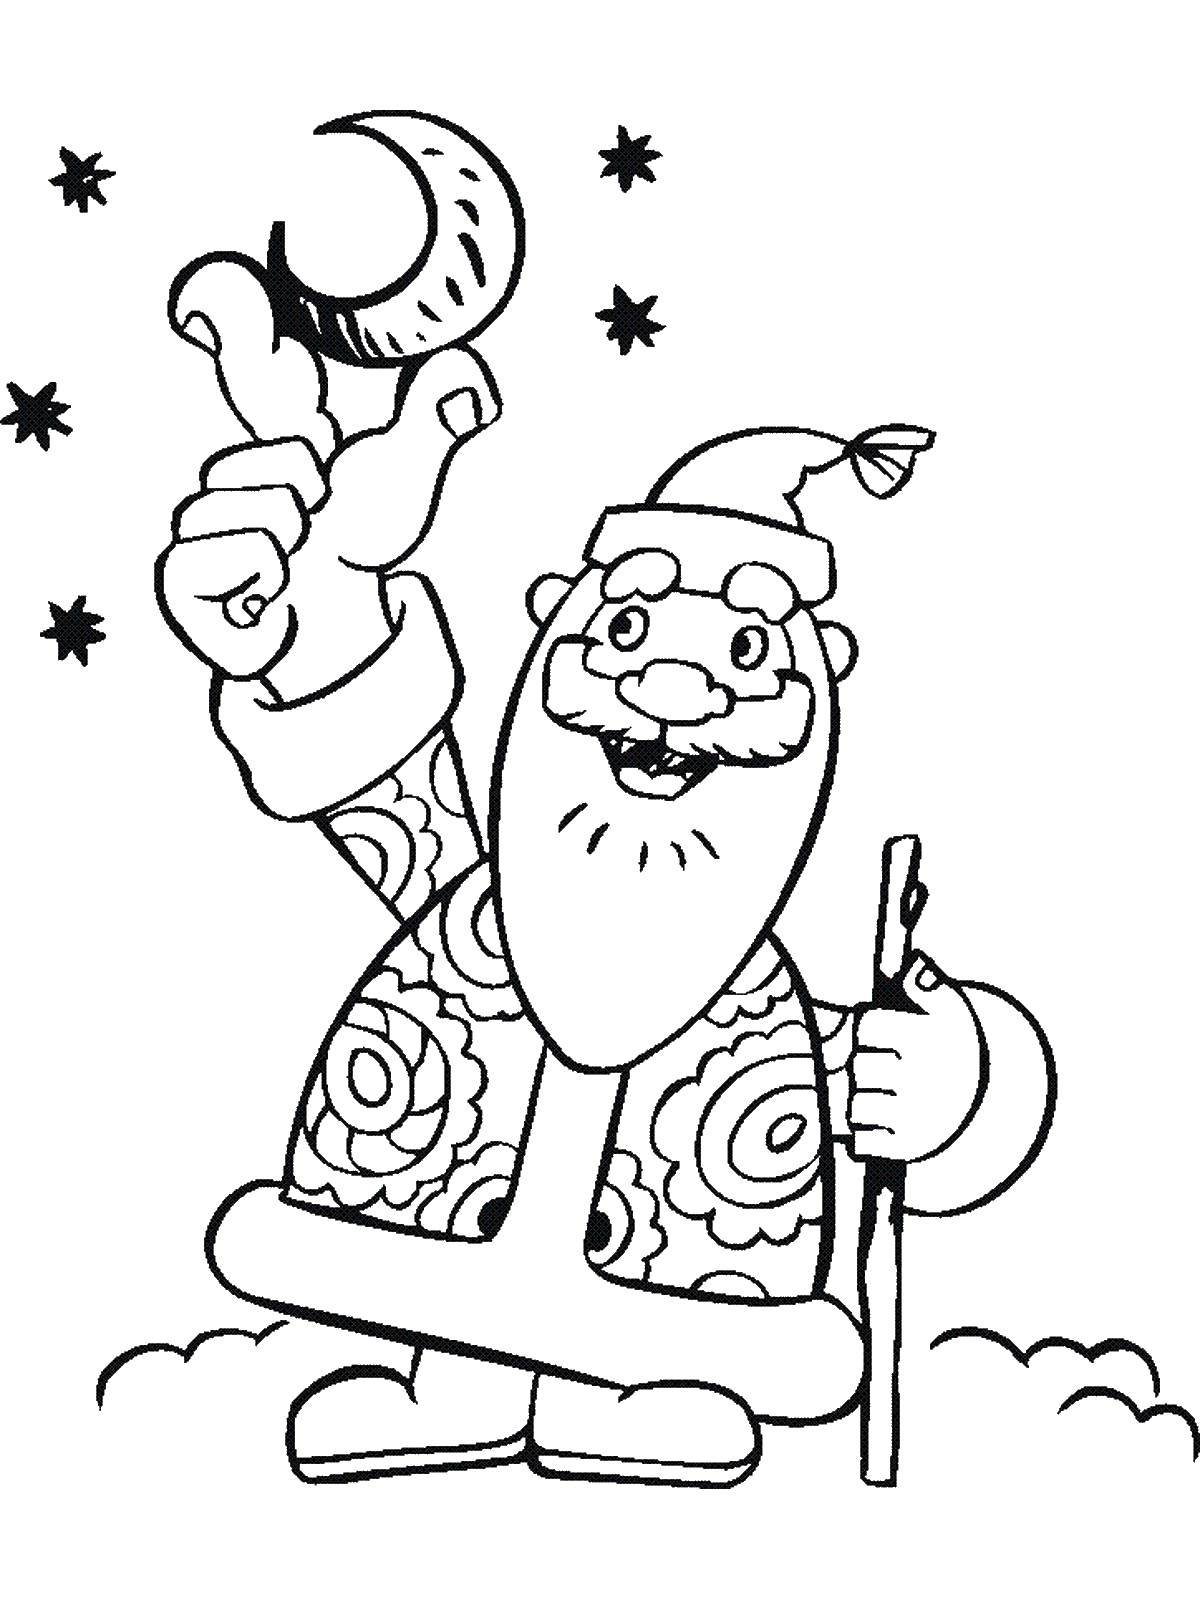 Coloring Santa Claus and the Crescent. Category new year. Tags:  New Year, Santa Claus, Santa Claus, gifts.